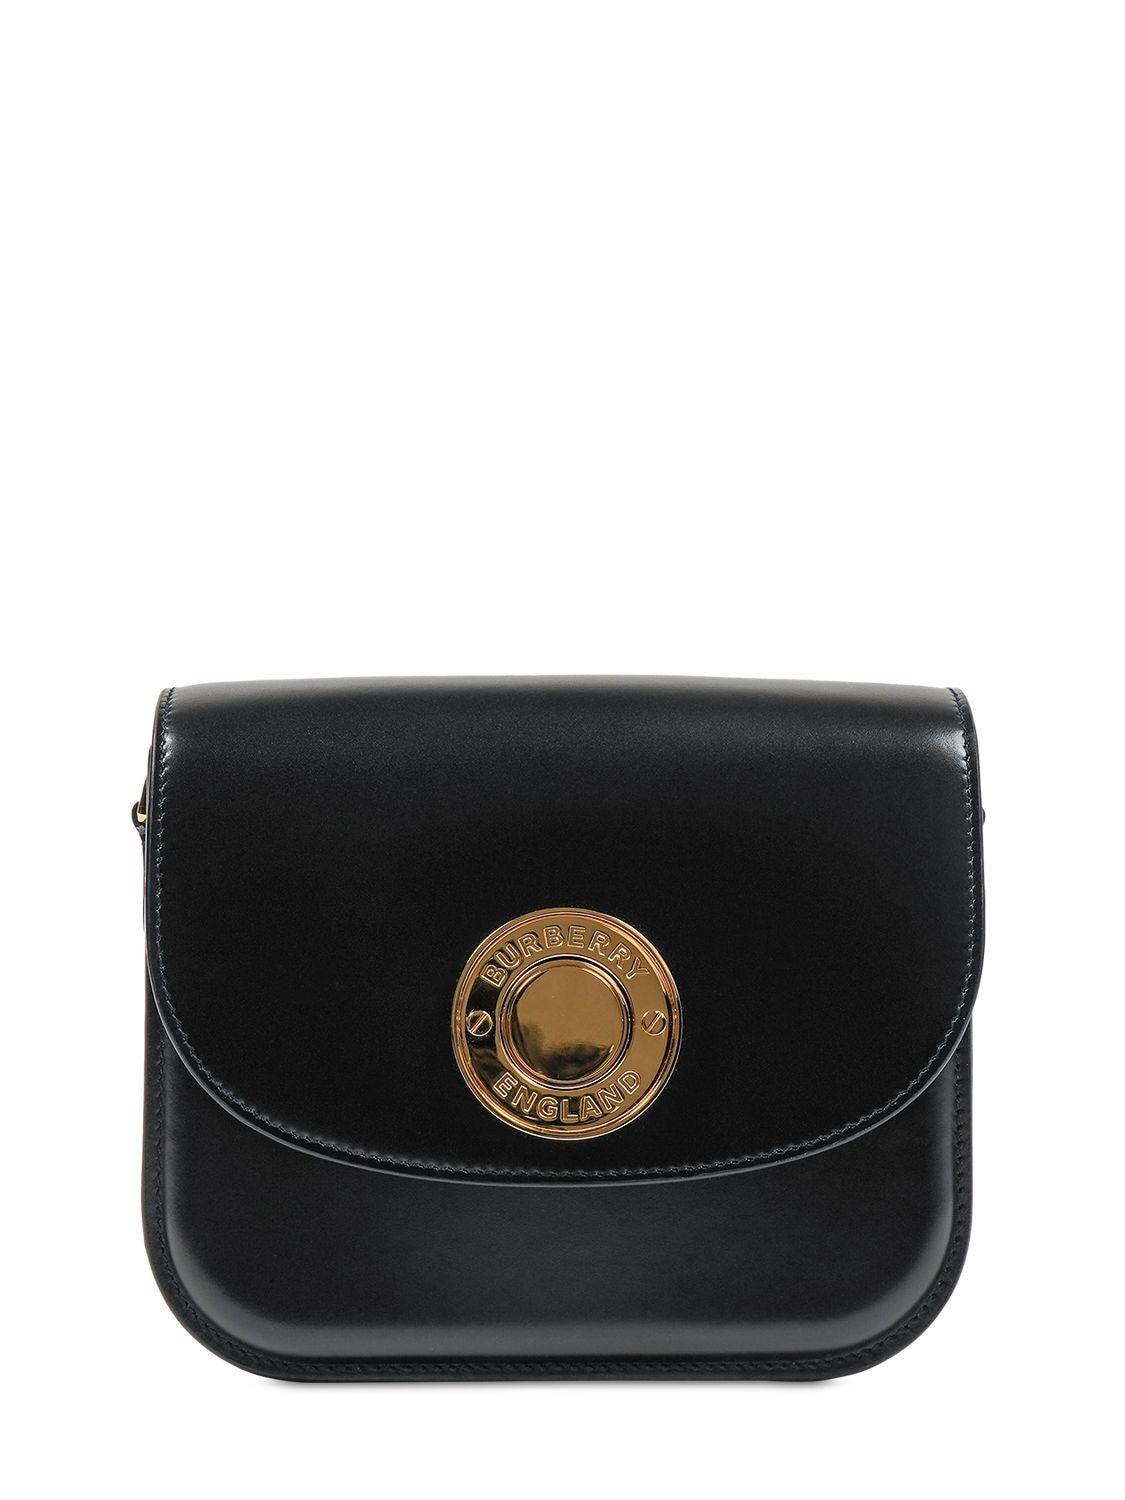 BURBERRY Note Small Leather Shoulder Bag in black